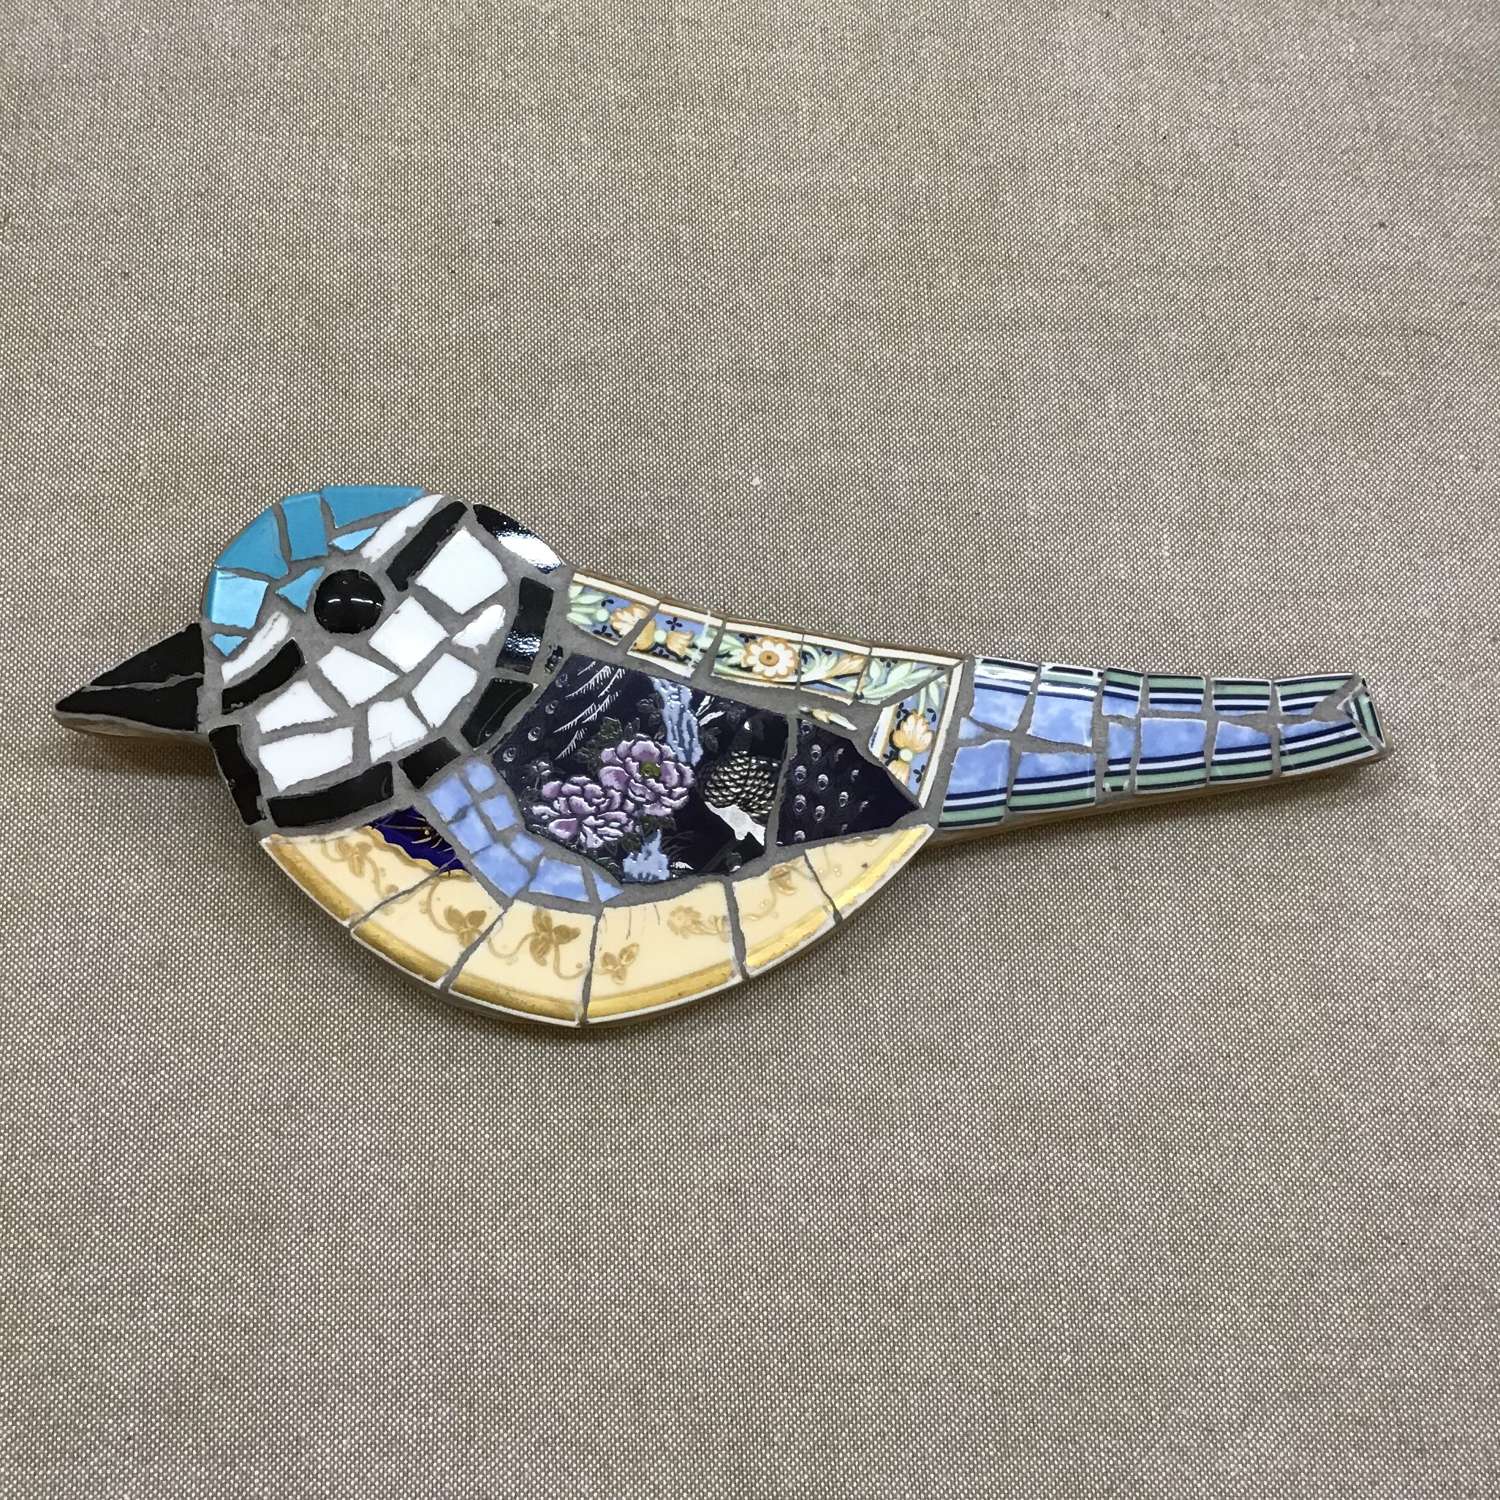 Hand crafted mosaic bird using vintage and antique china on wood